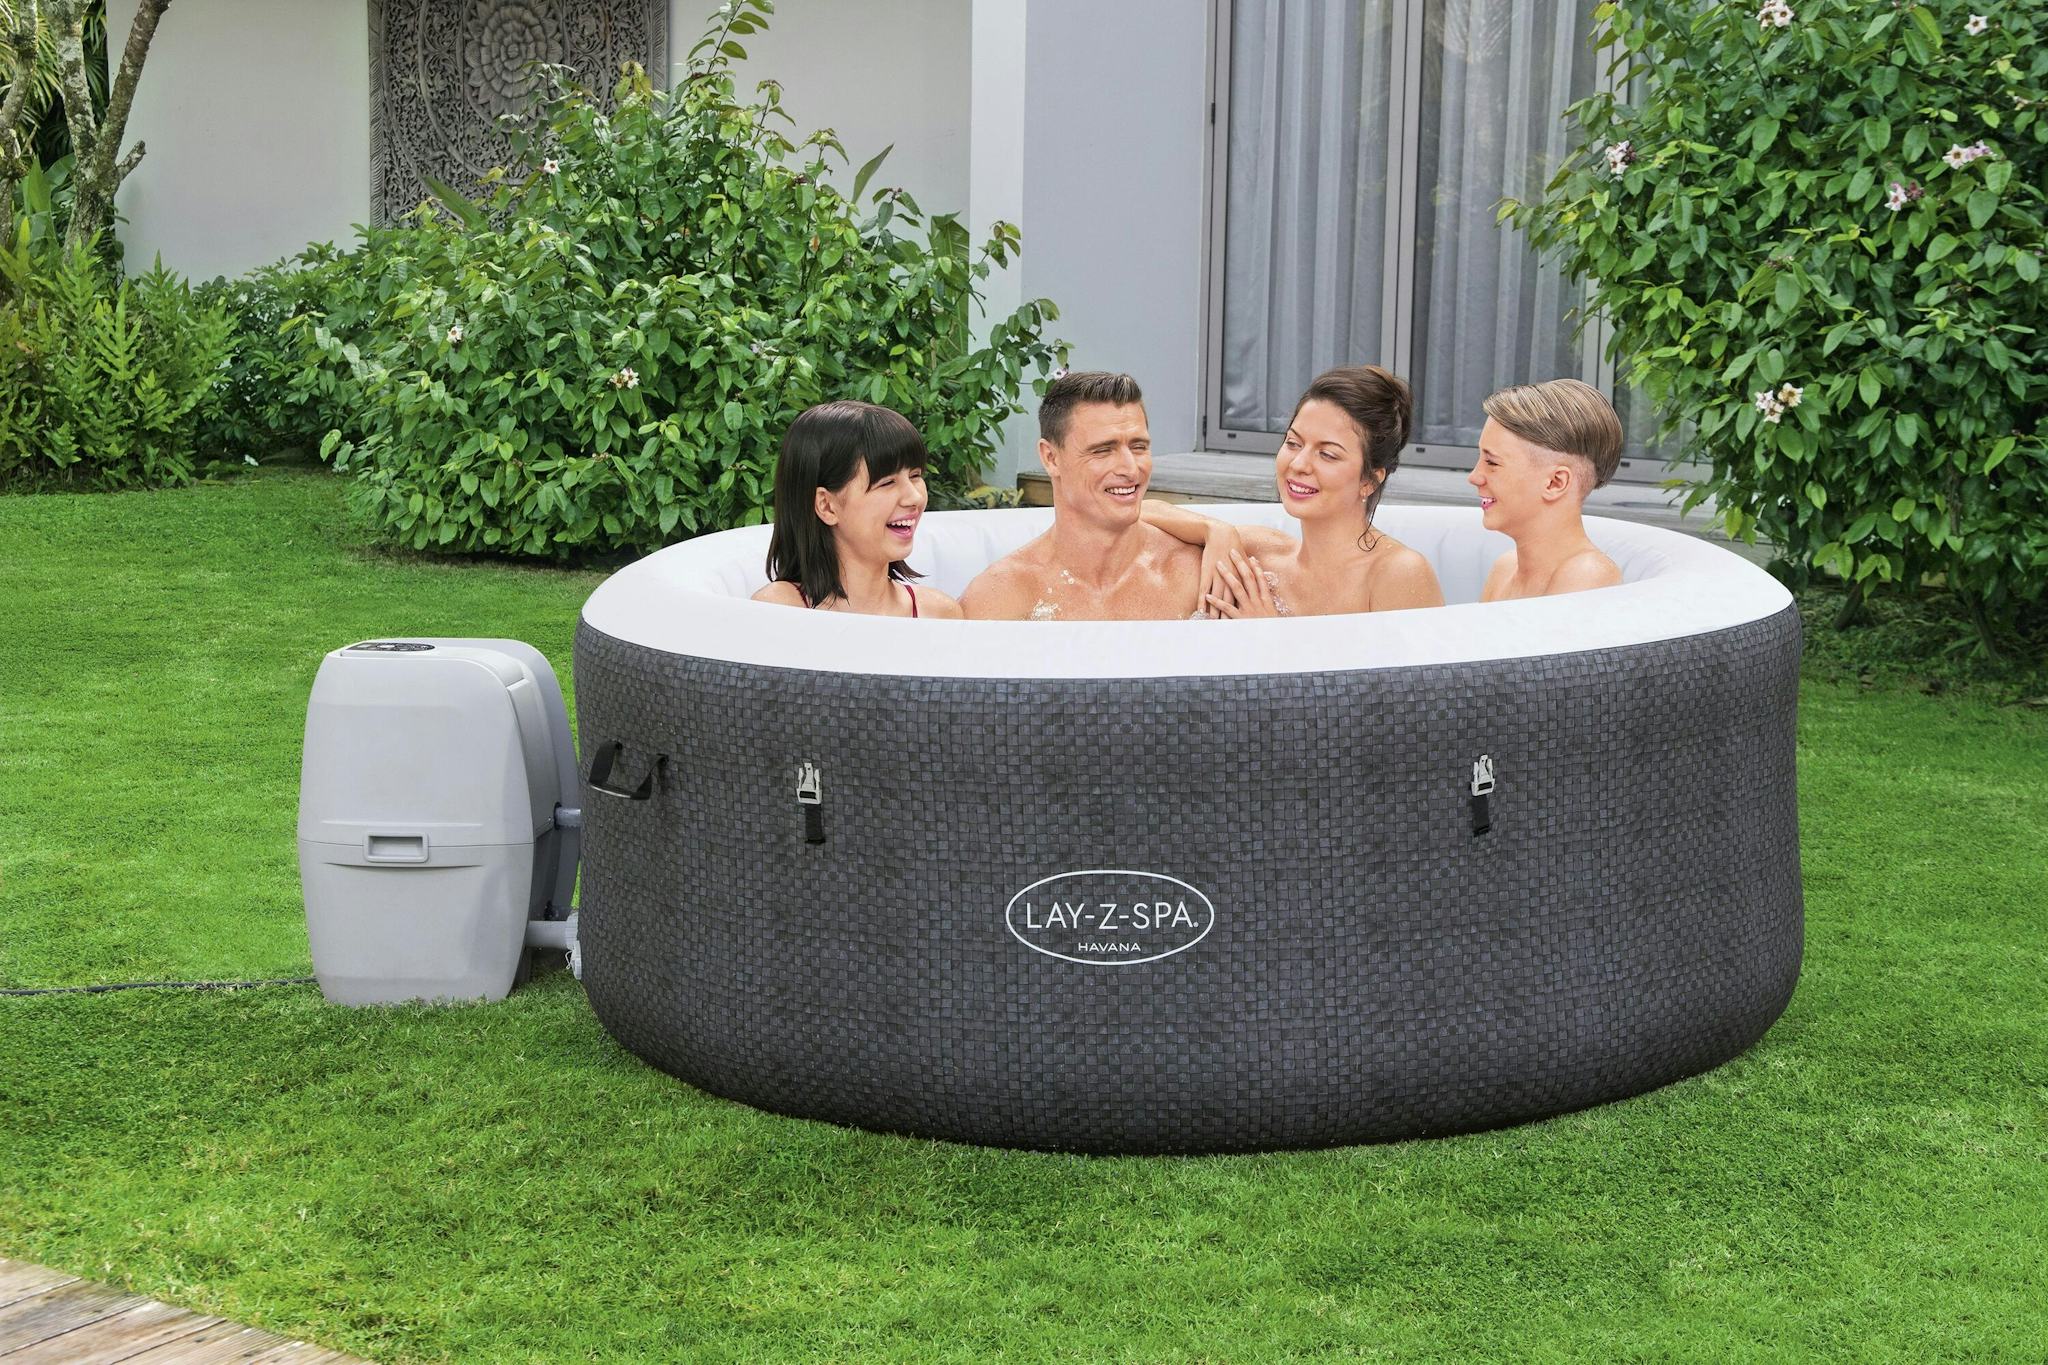 Spas Gonflables Spa gonflable rond Lay-Z-Spa Havana Airjet™ 2 - 4 personnes Bestway 12